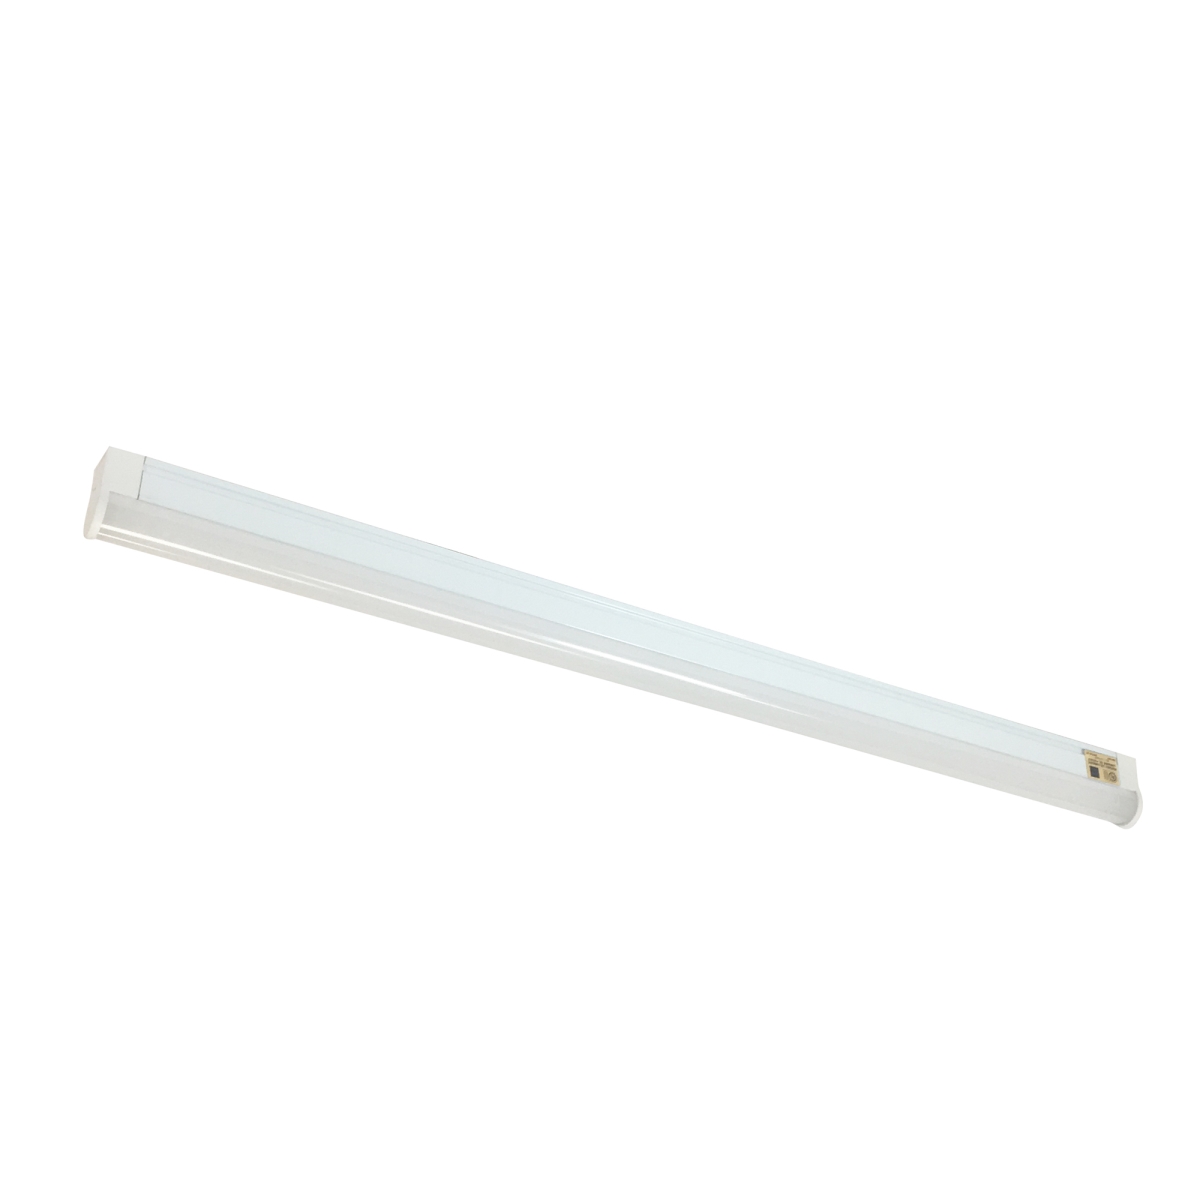 Picture of Nora Lighting NULS-LED2127W 21 in. 2700K Undercabinet Linear LED Fixture - White